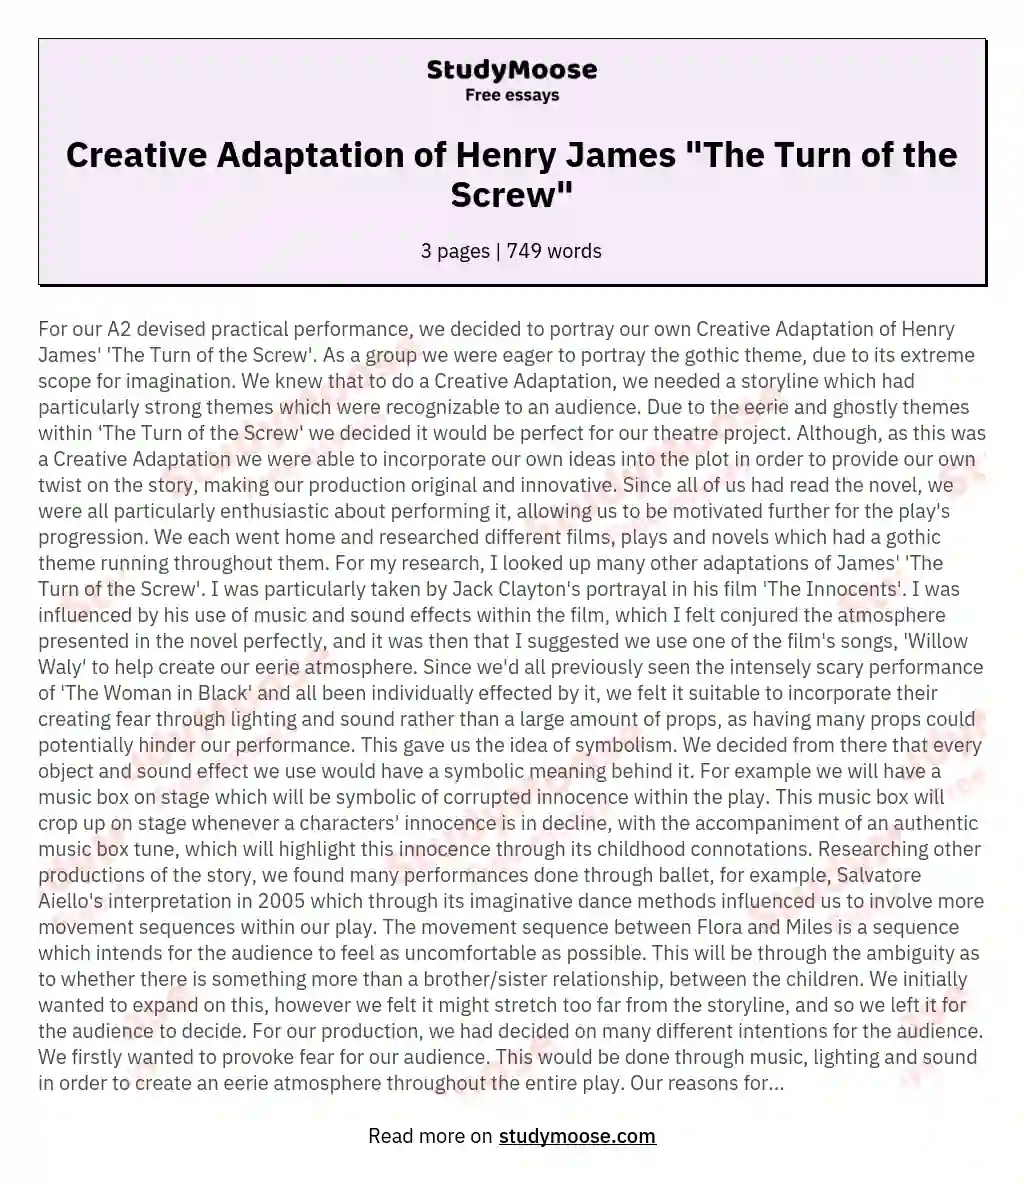 Creative Adaptation of Henry James "The Turn of the Screw" essay